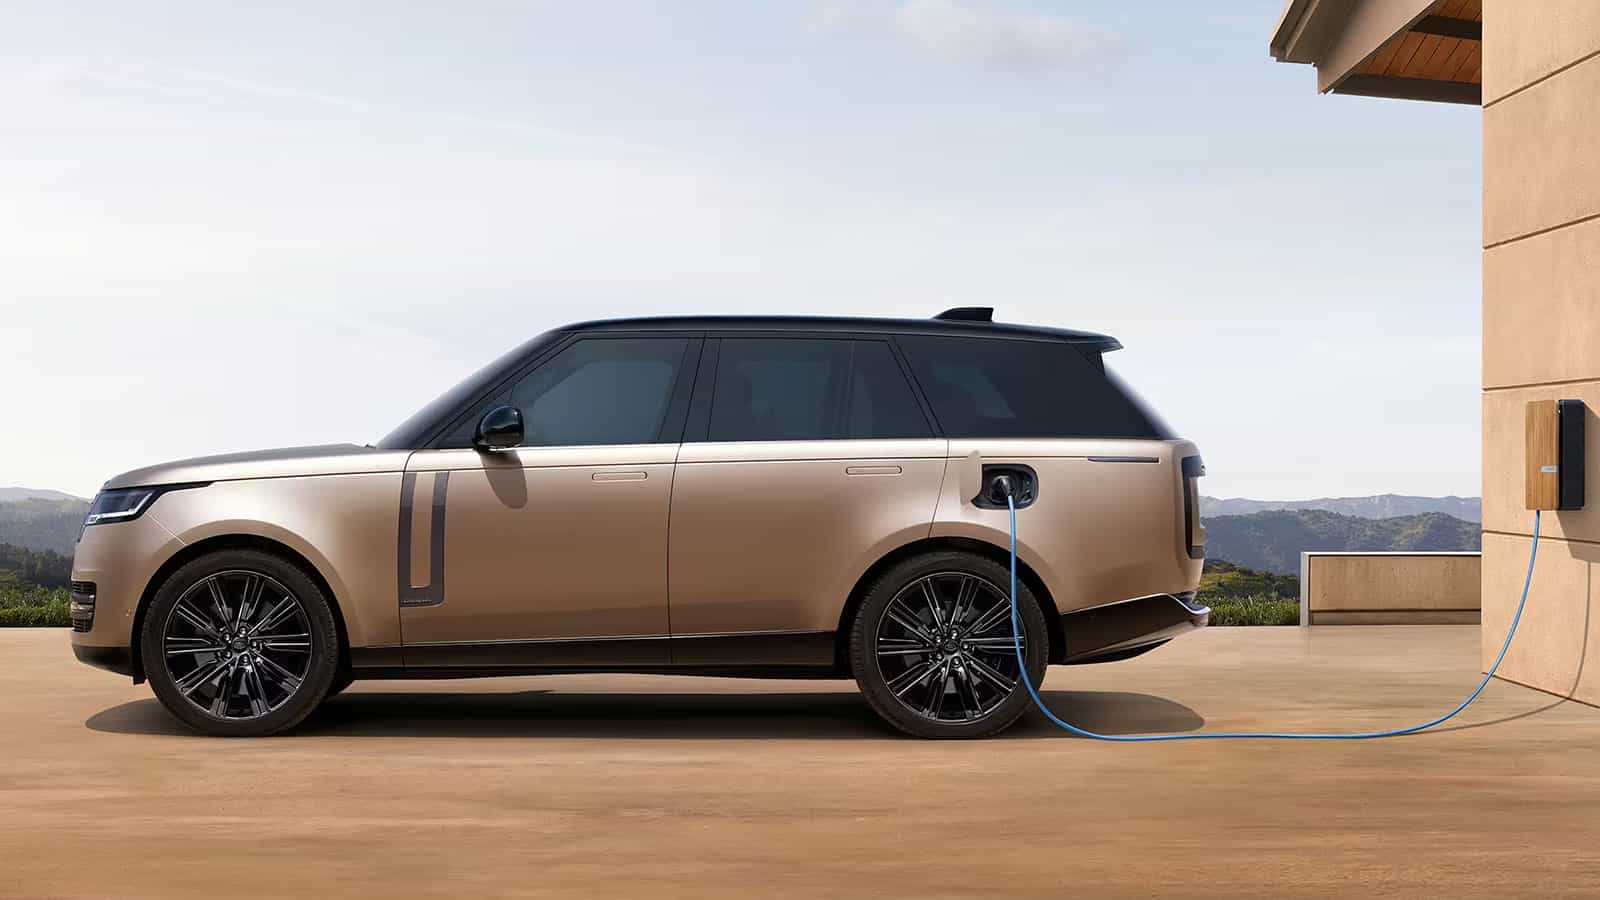 Range Rover Electric side view while charging